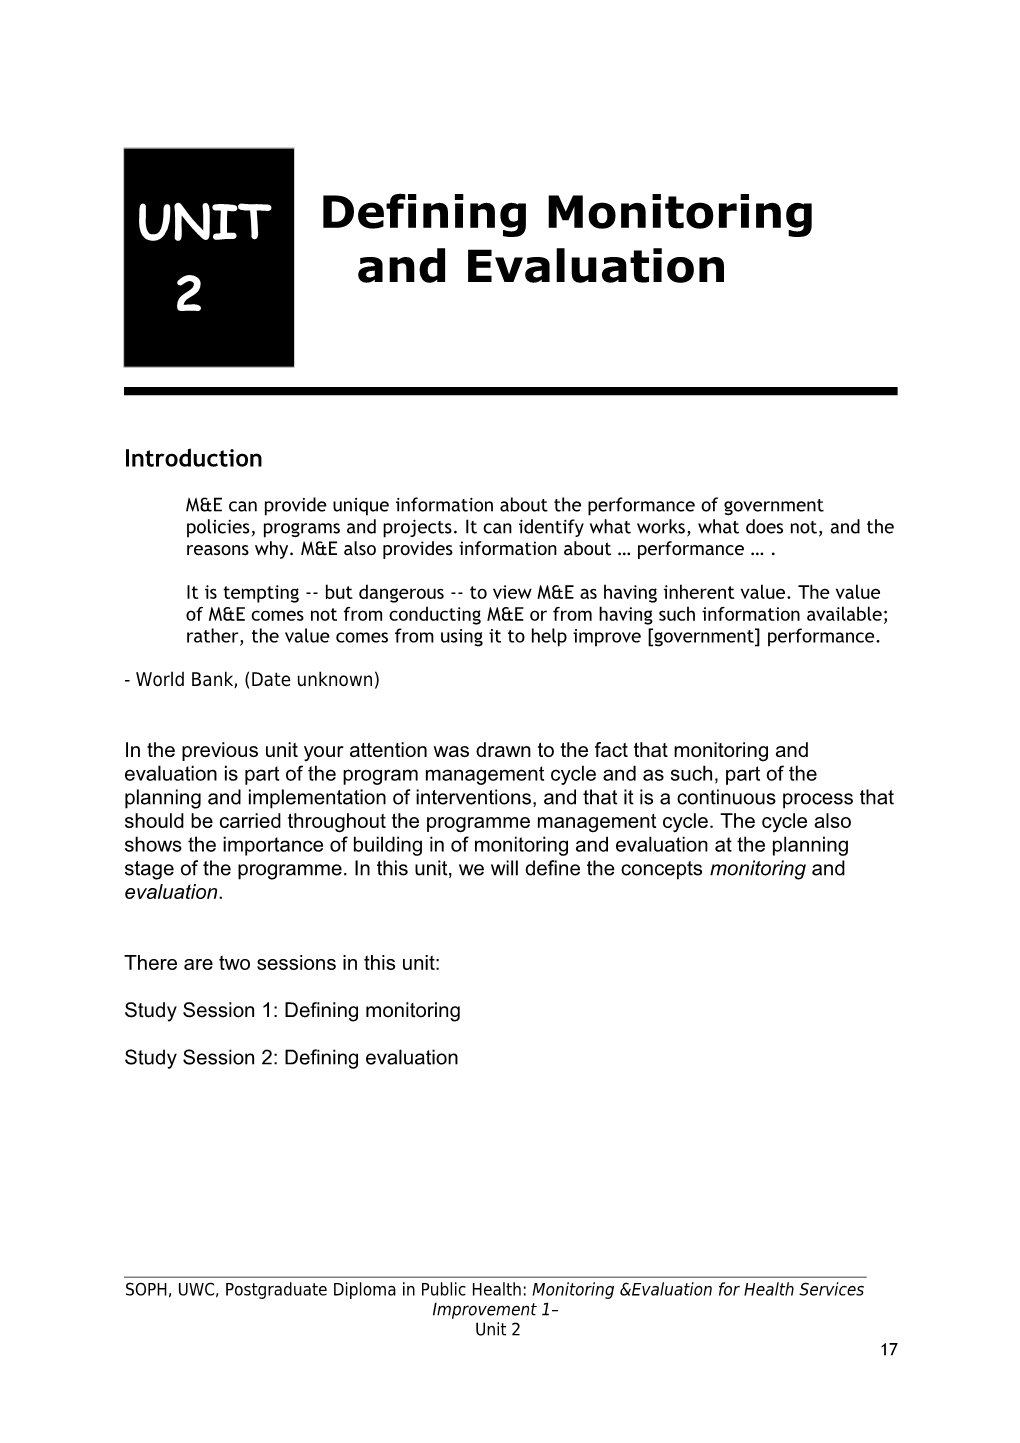 Defining Monitoring and Evaluation